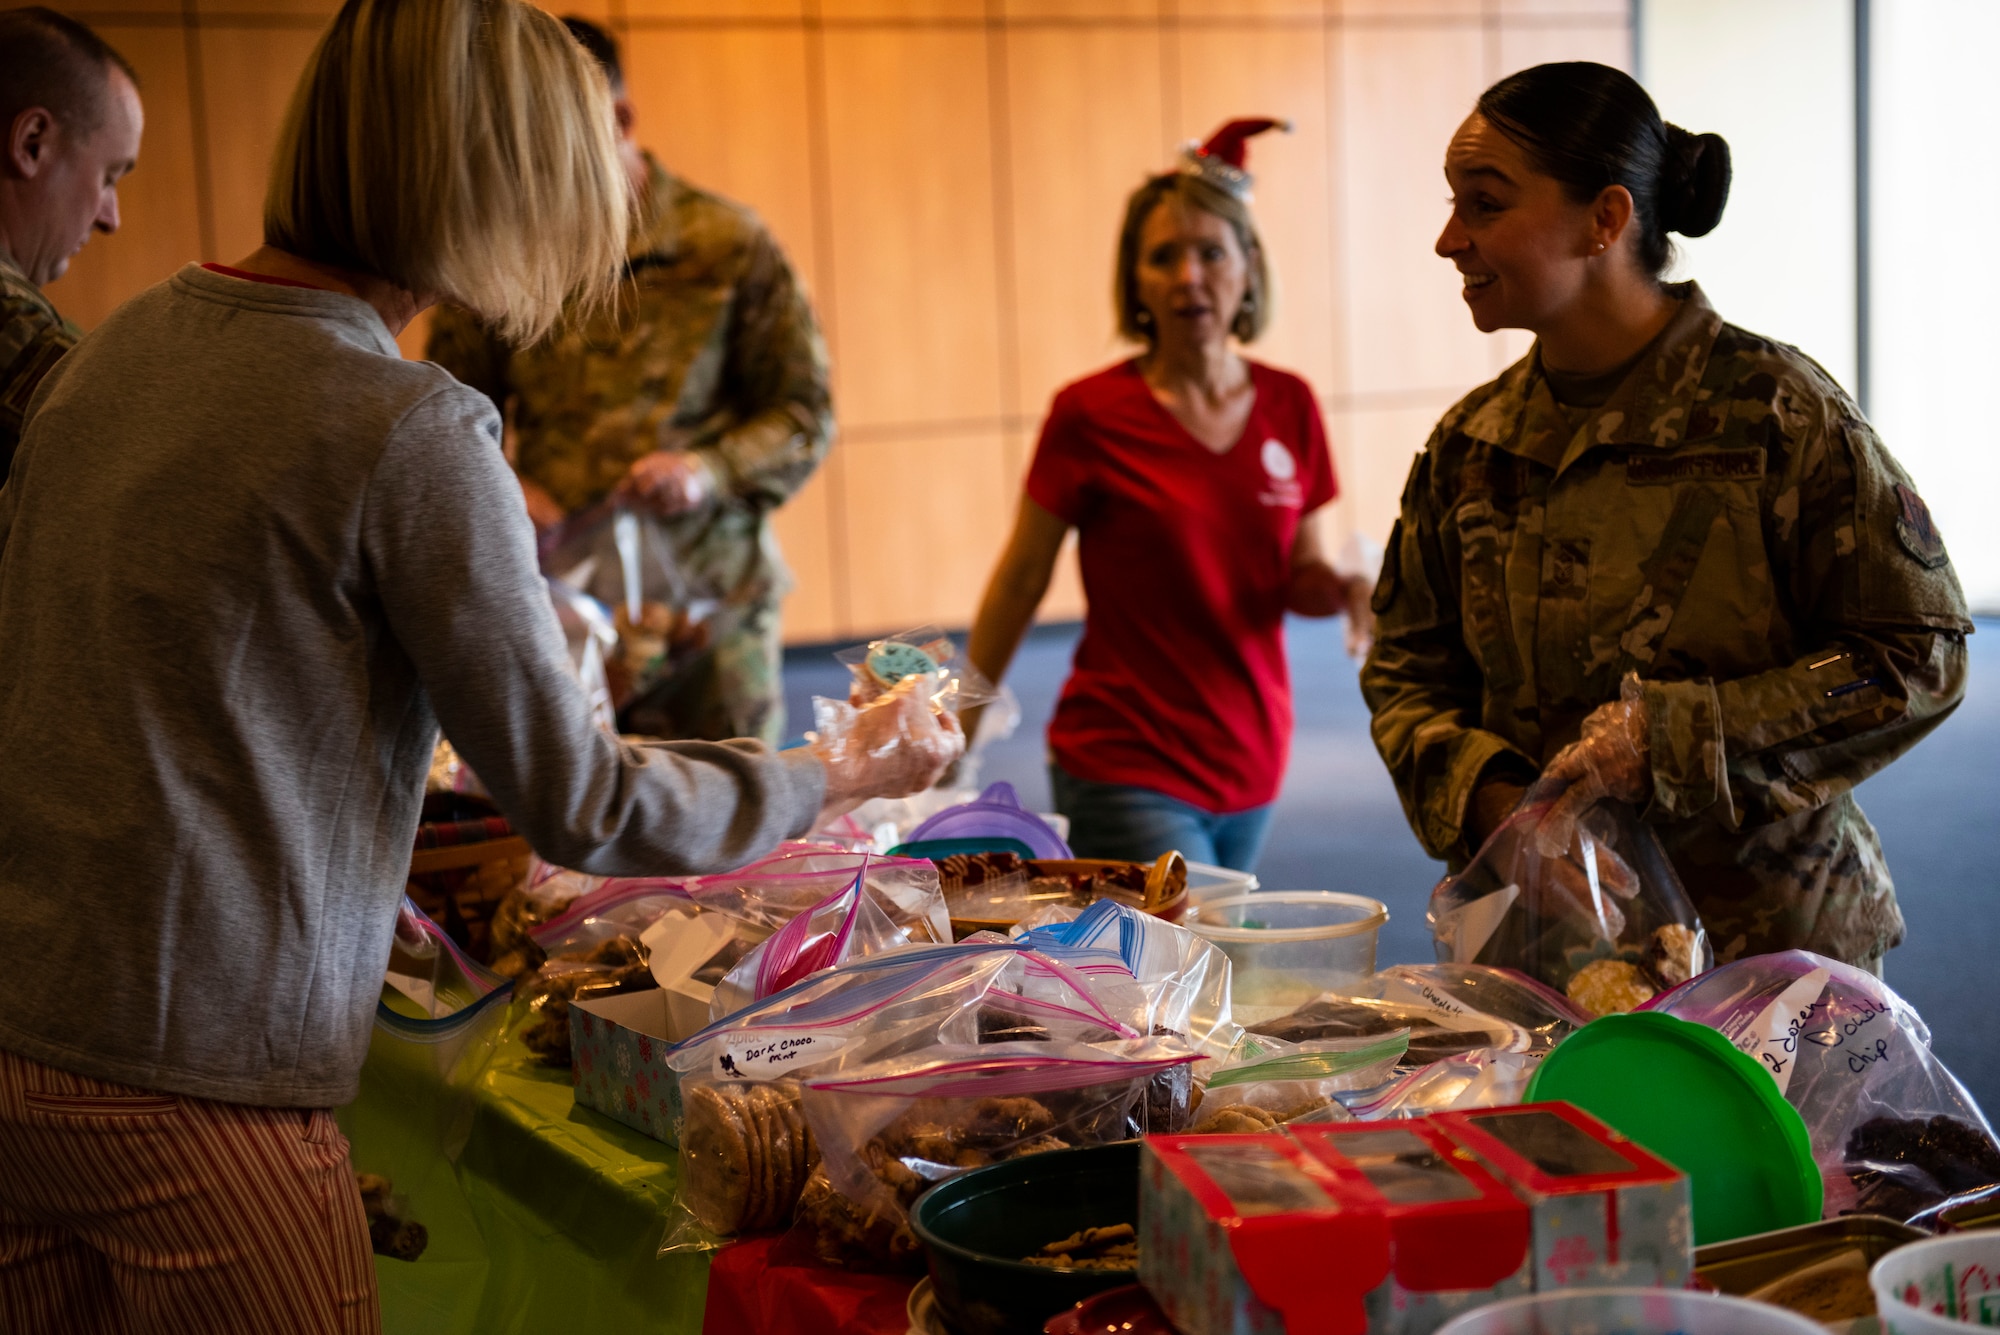 U.S. Air Force Master Sgt. Moriah Washburn, first sergeant to multiple units assigned to the 325th Mission Support Group, bags cookies at a Cookie Caper event at Tyndall Air Force Base, Florida, Dec. 9, 2019.  The Tyndall First Sergeants and Tyndall Spouses Club organized the event and collected hundreds of donated cookies to give to Airmen living in the on base dormitories, as well as delivering the extra cookies to base offices and units. (U.S. Air Force photo by Staff Sgt. Magen M. Reeves)